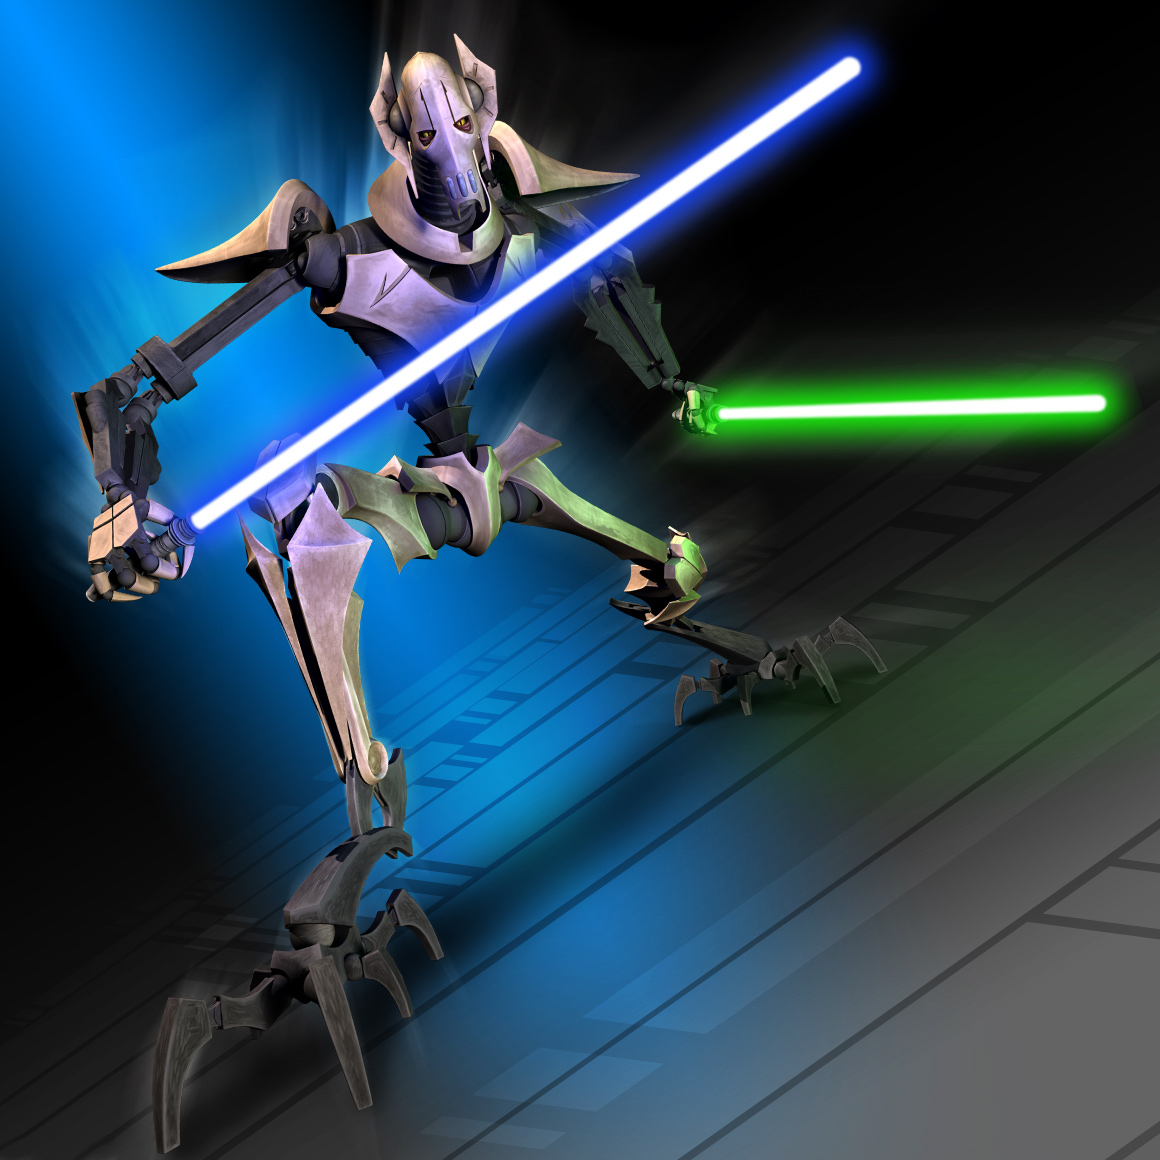 How many lightsabers does general Grievous carry on him?